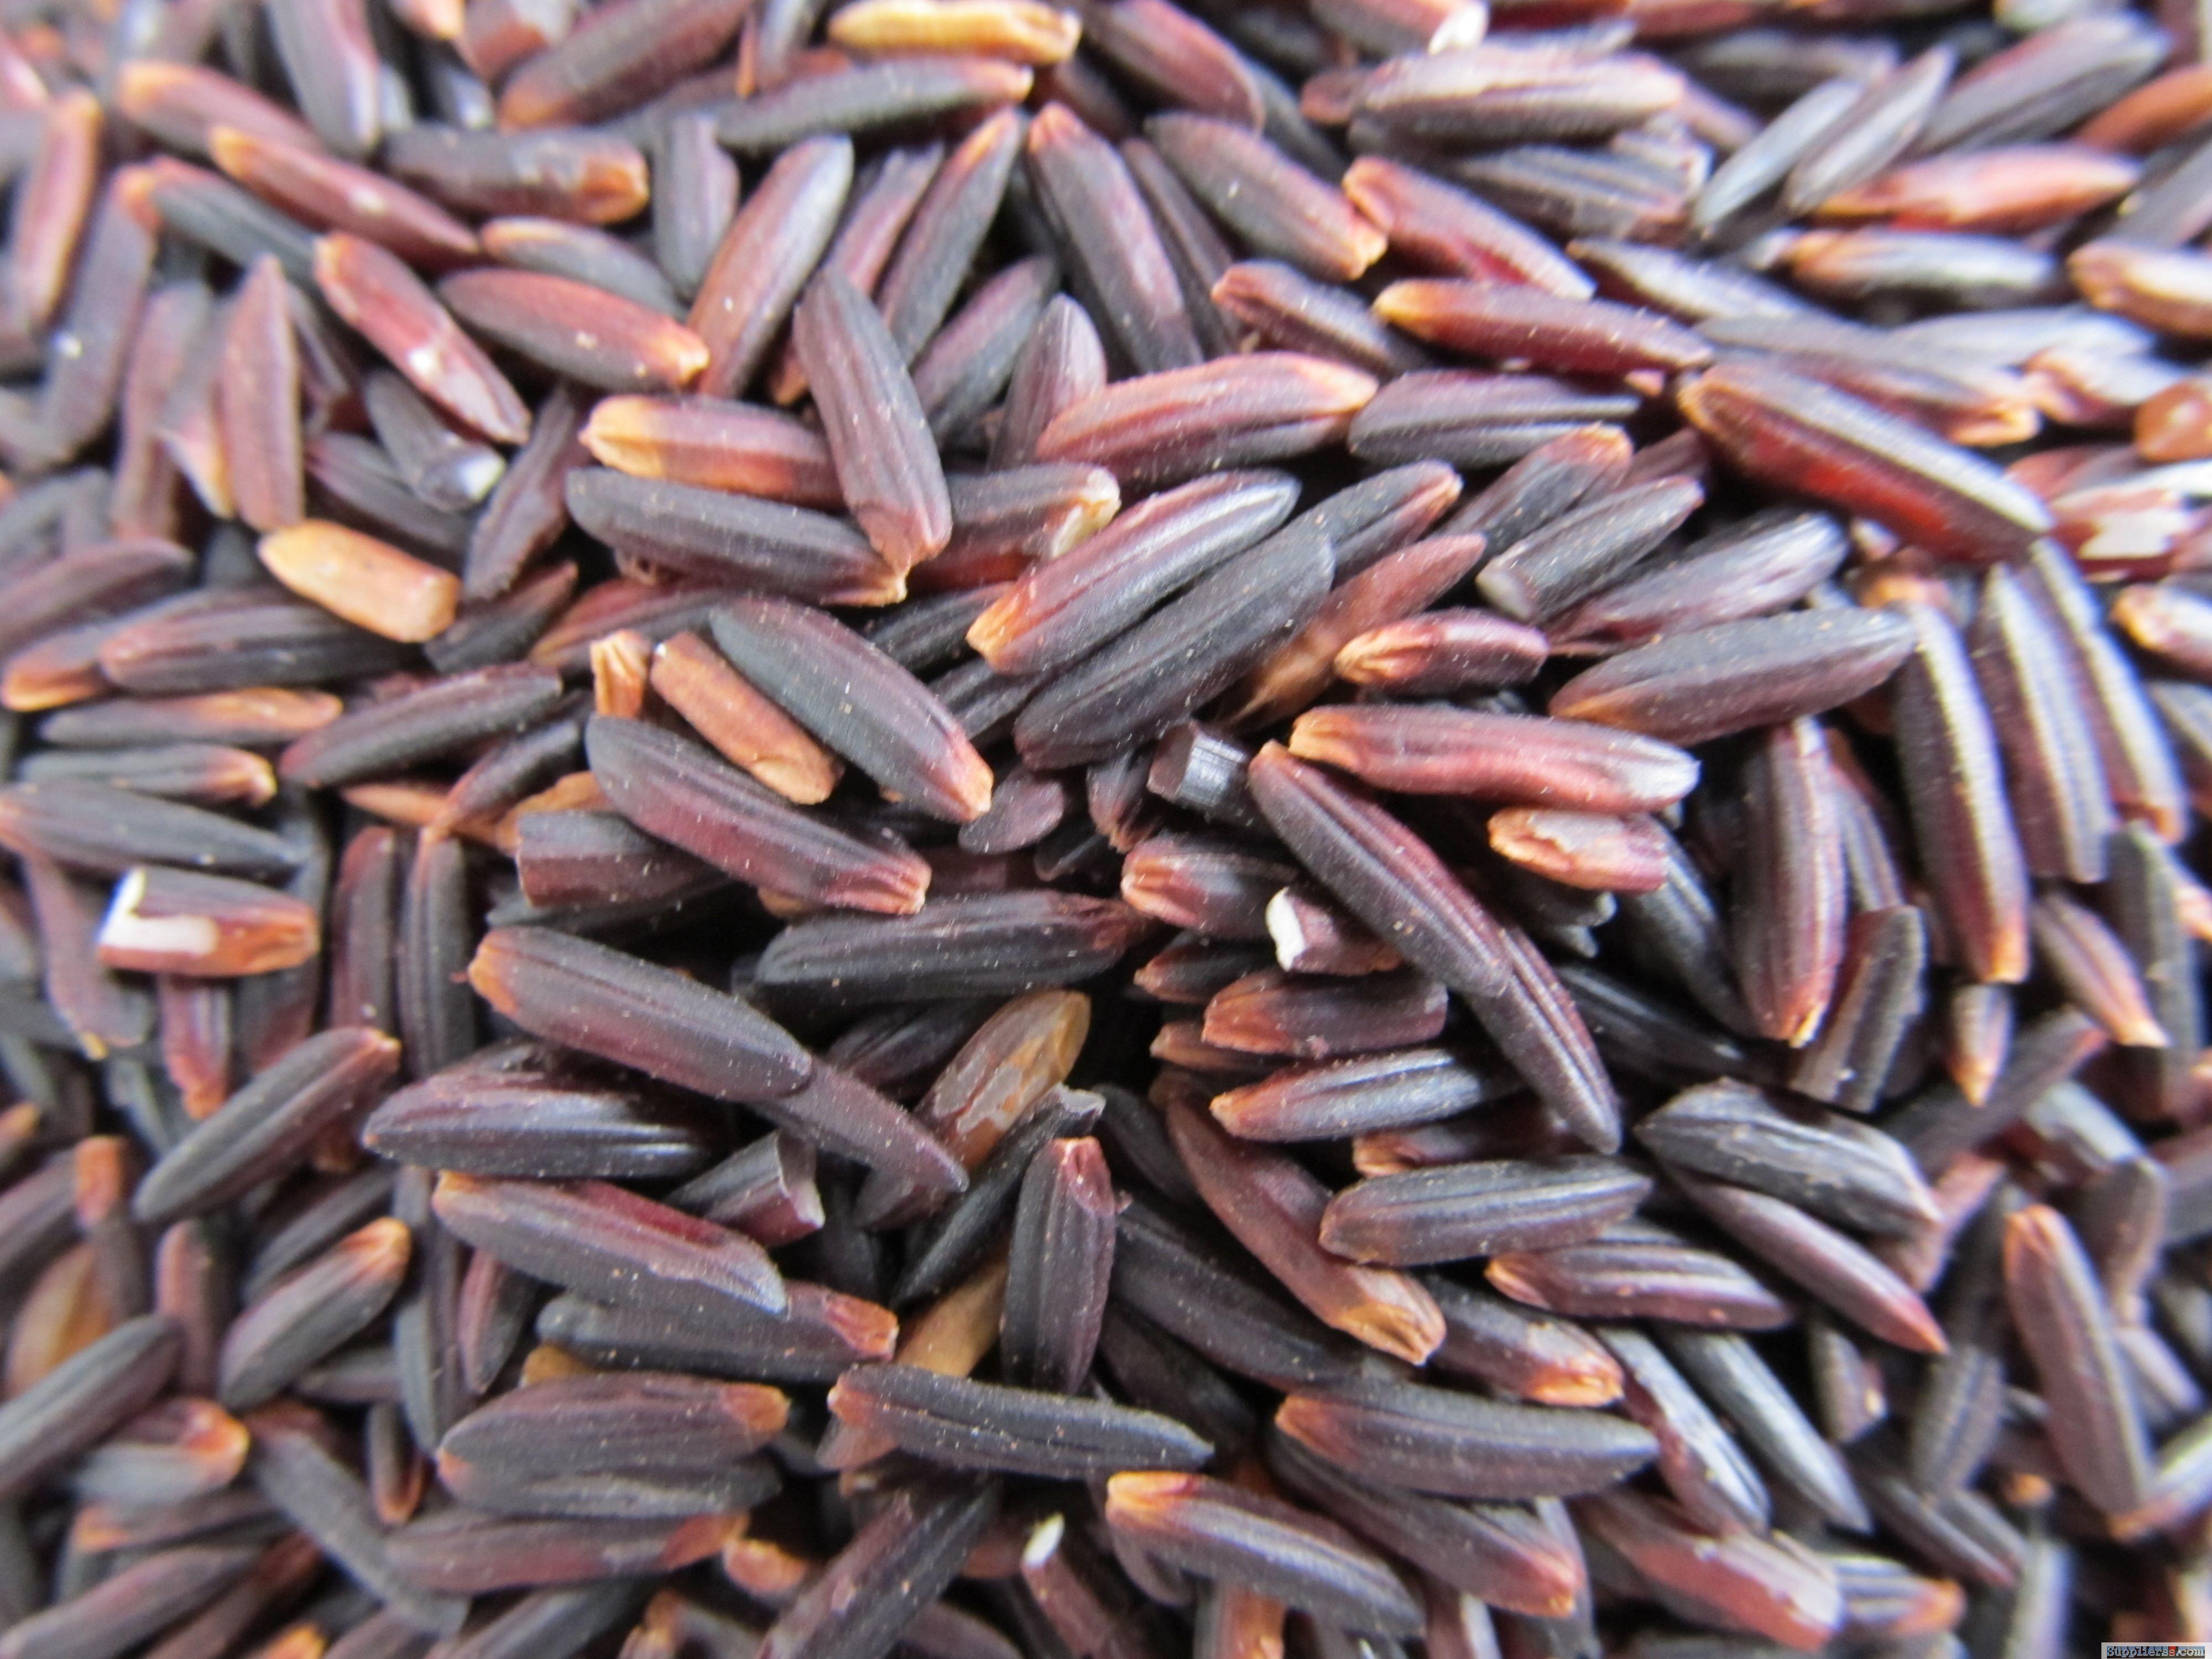 Black Rice From Vietnam / Herbal Purple Rice From Vietnam With High Quality For Sales